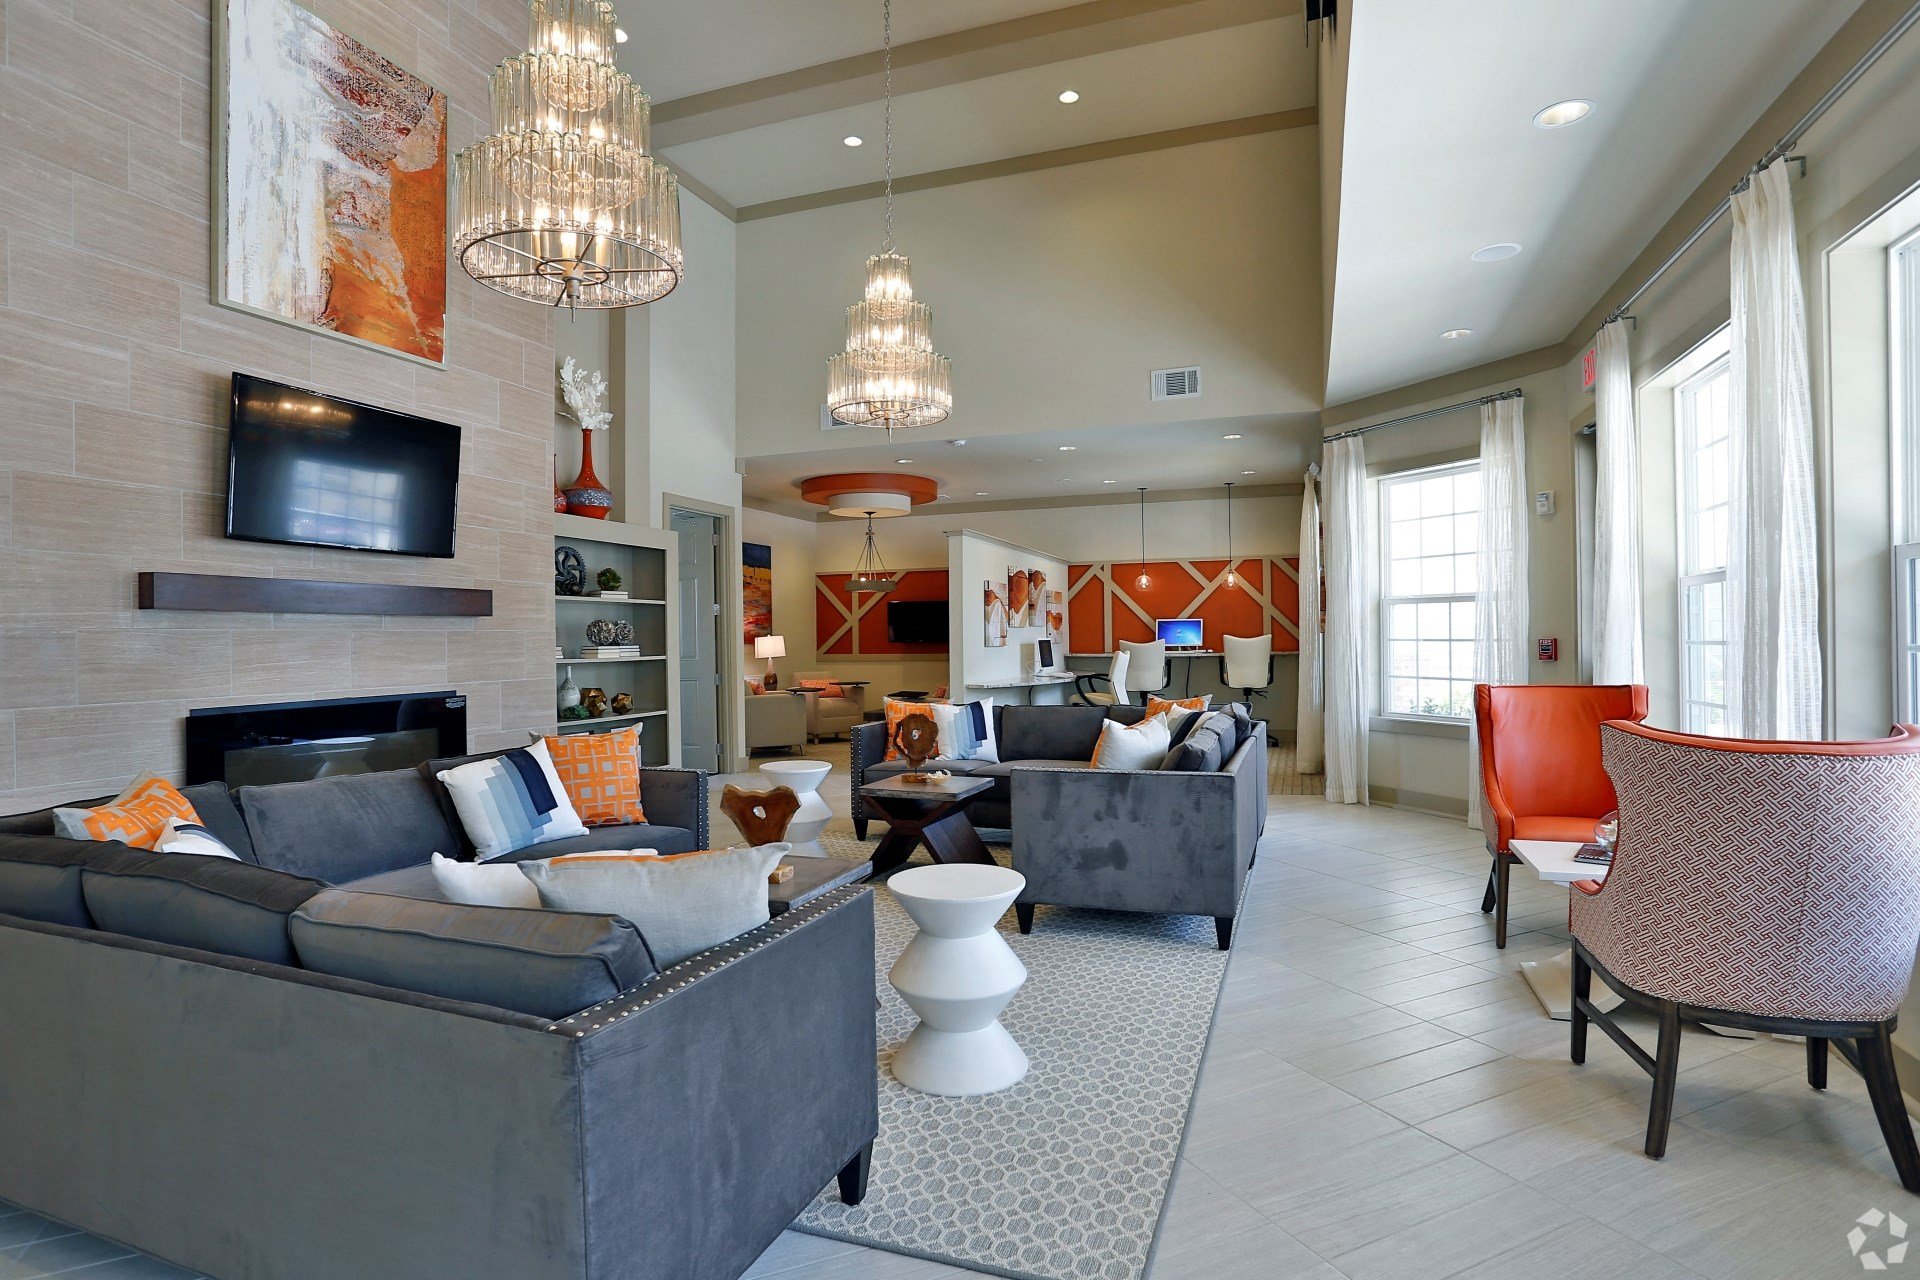 Stunning clubhouse lounge area at The Columns at Coldbrook Station, Port Wentworth, GA 31407